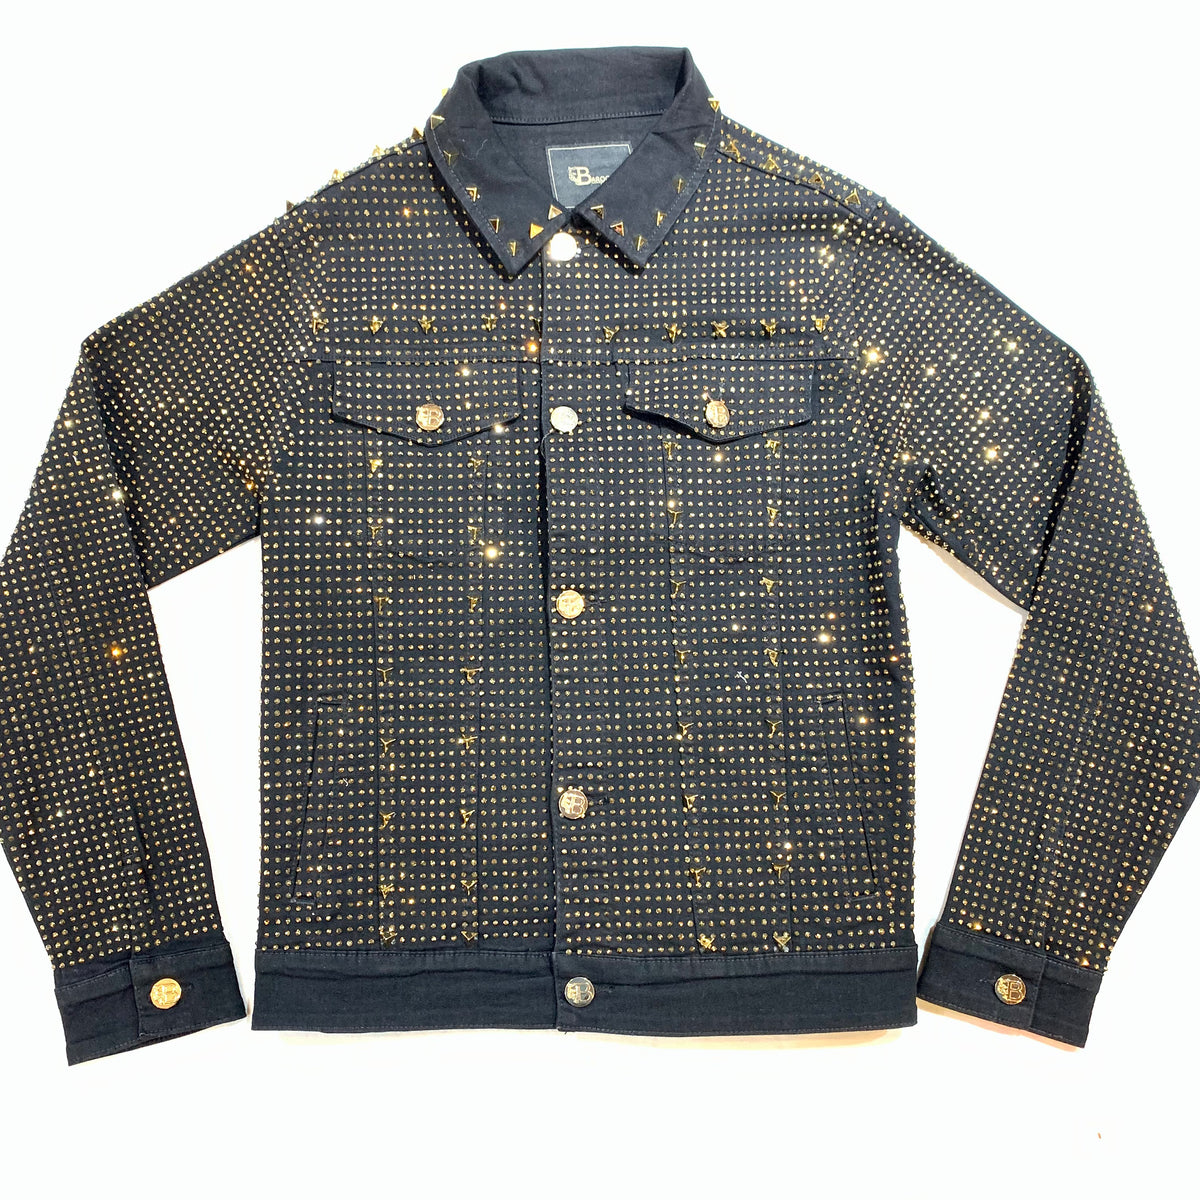 Barocco Black Fully Loaded Gold Crystal Spiked Jean Jacket - Dudes Boutique